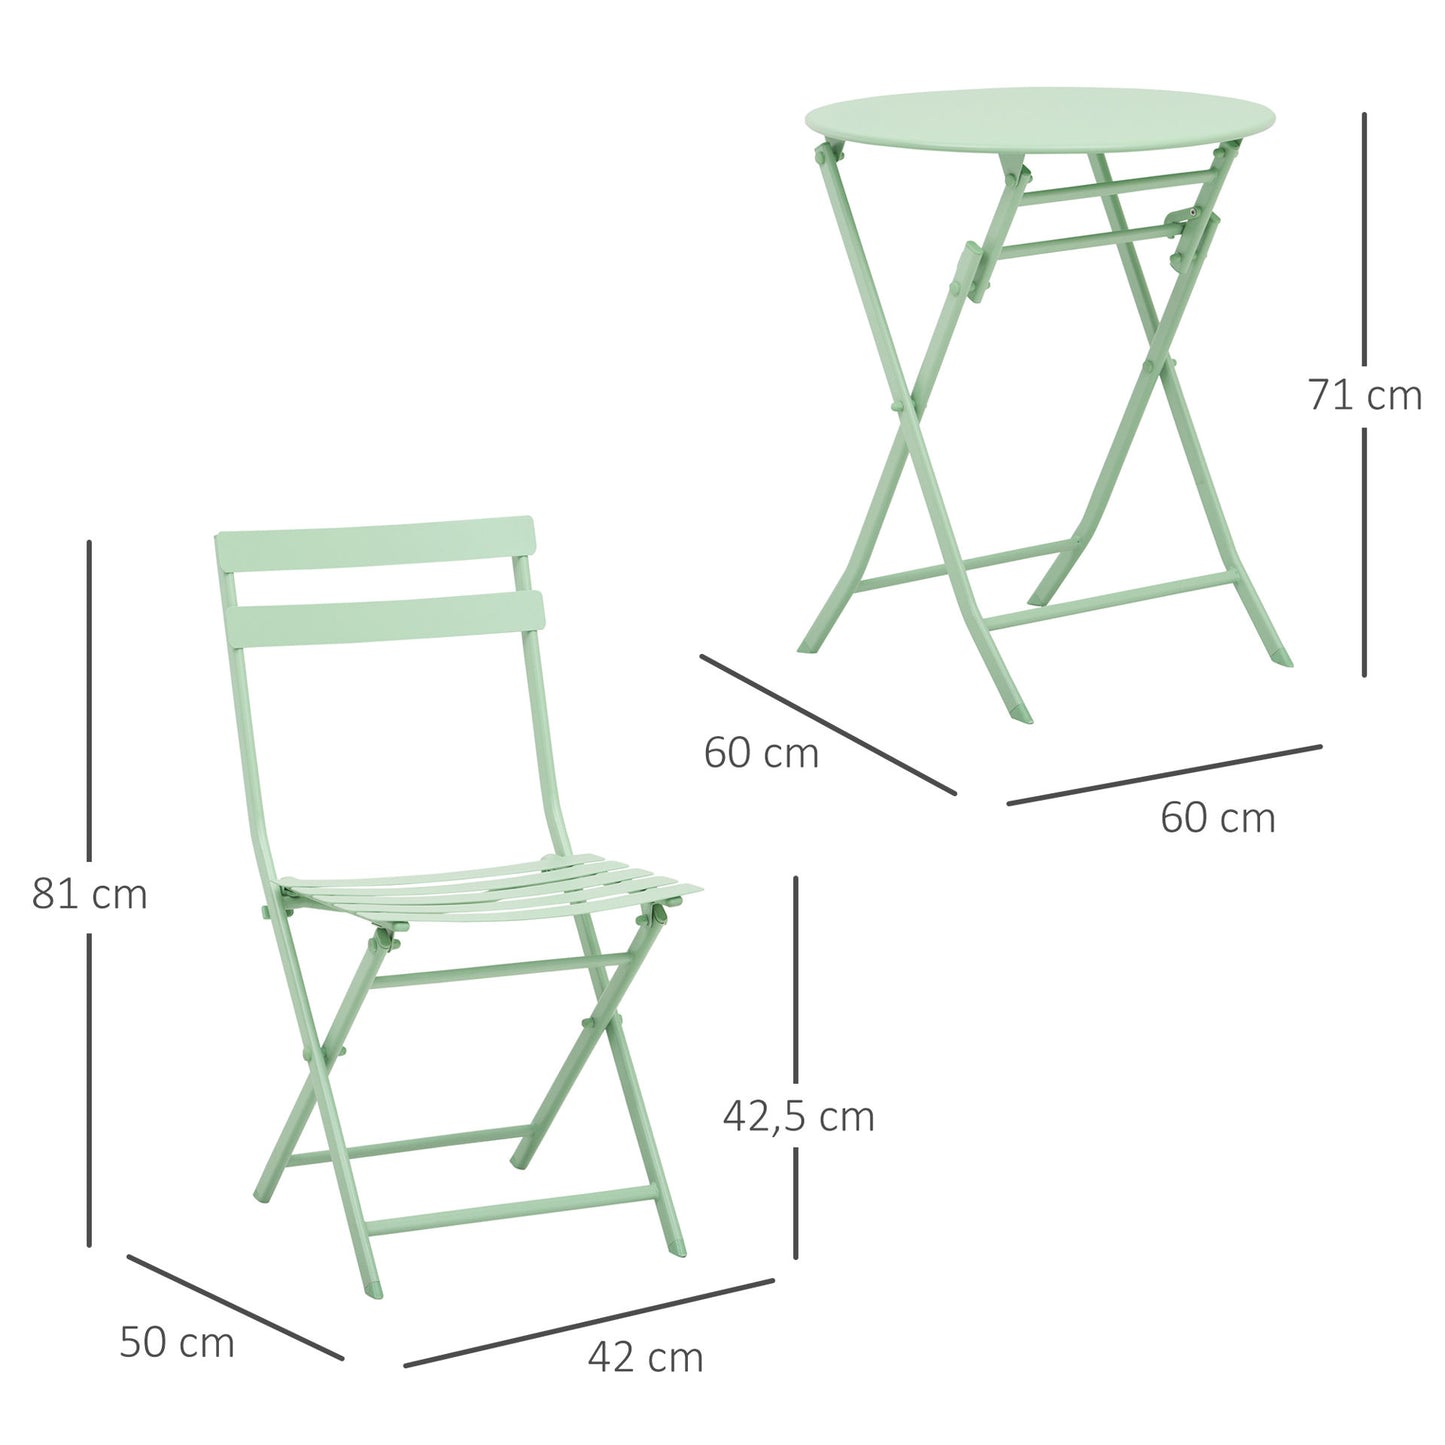 Nancy's Bremen Garden set for 2 people balcony furniture set bistro table with 2 chairs for garden foldable green